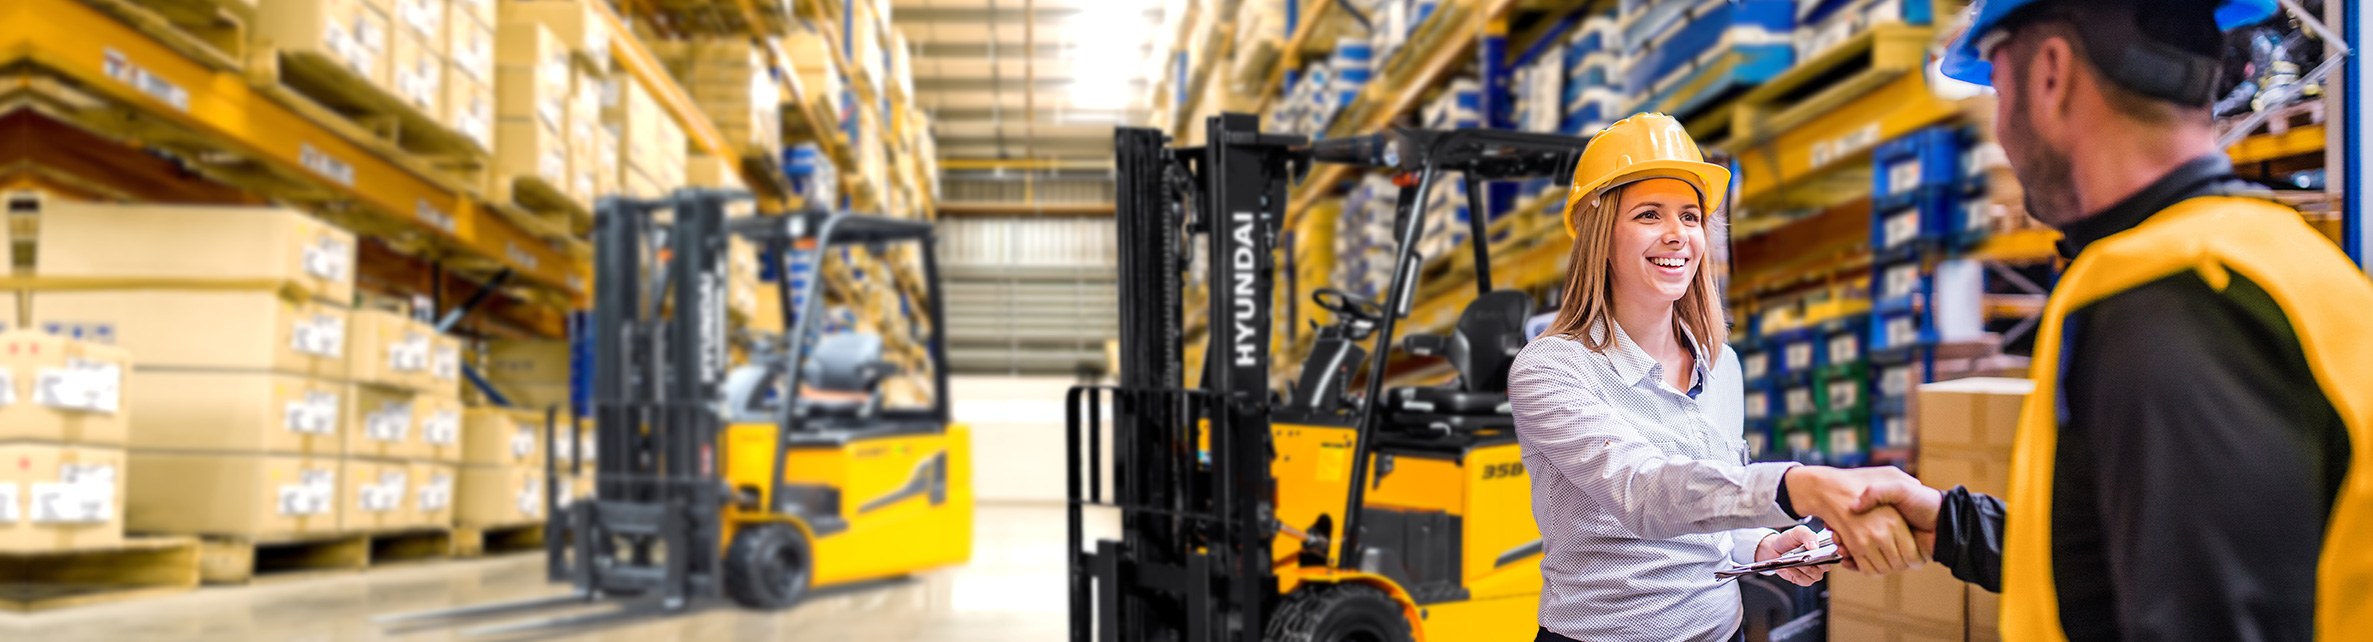 Forklift Hire Perth